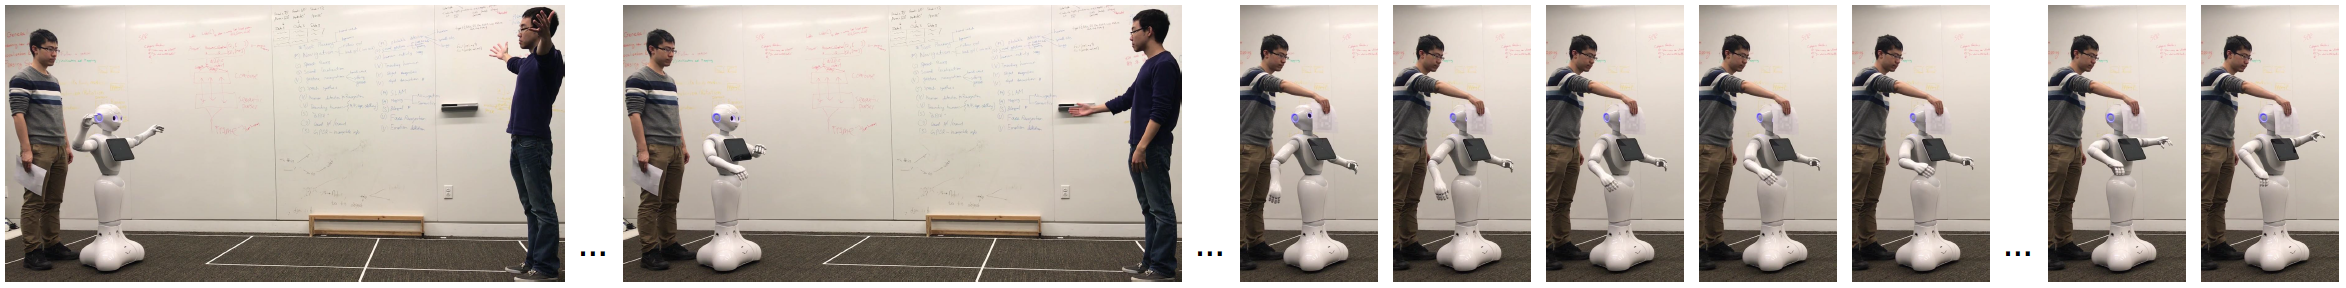 Motion Prediction for Human-Robot Interaction